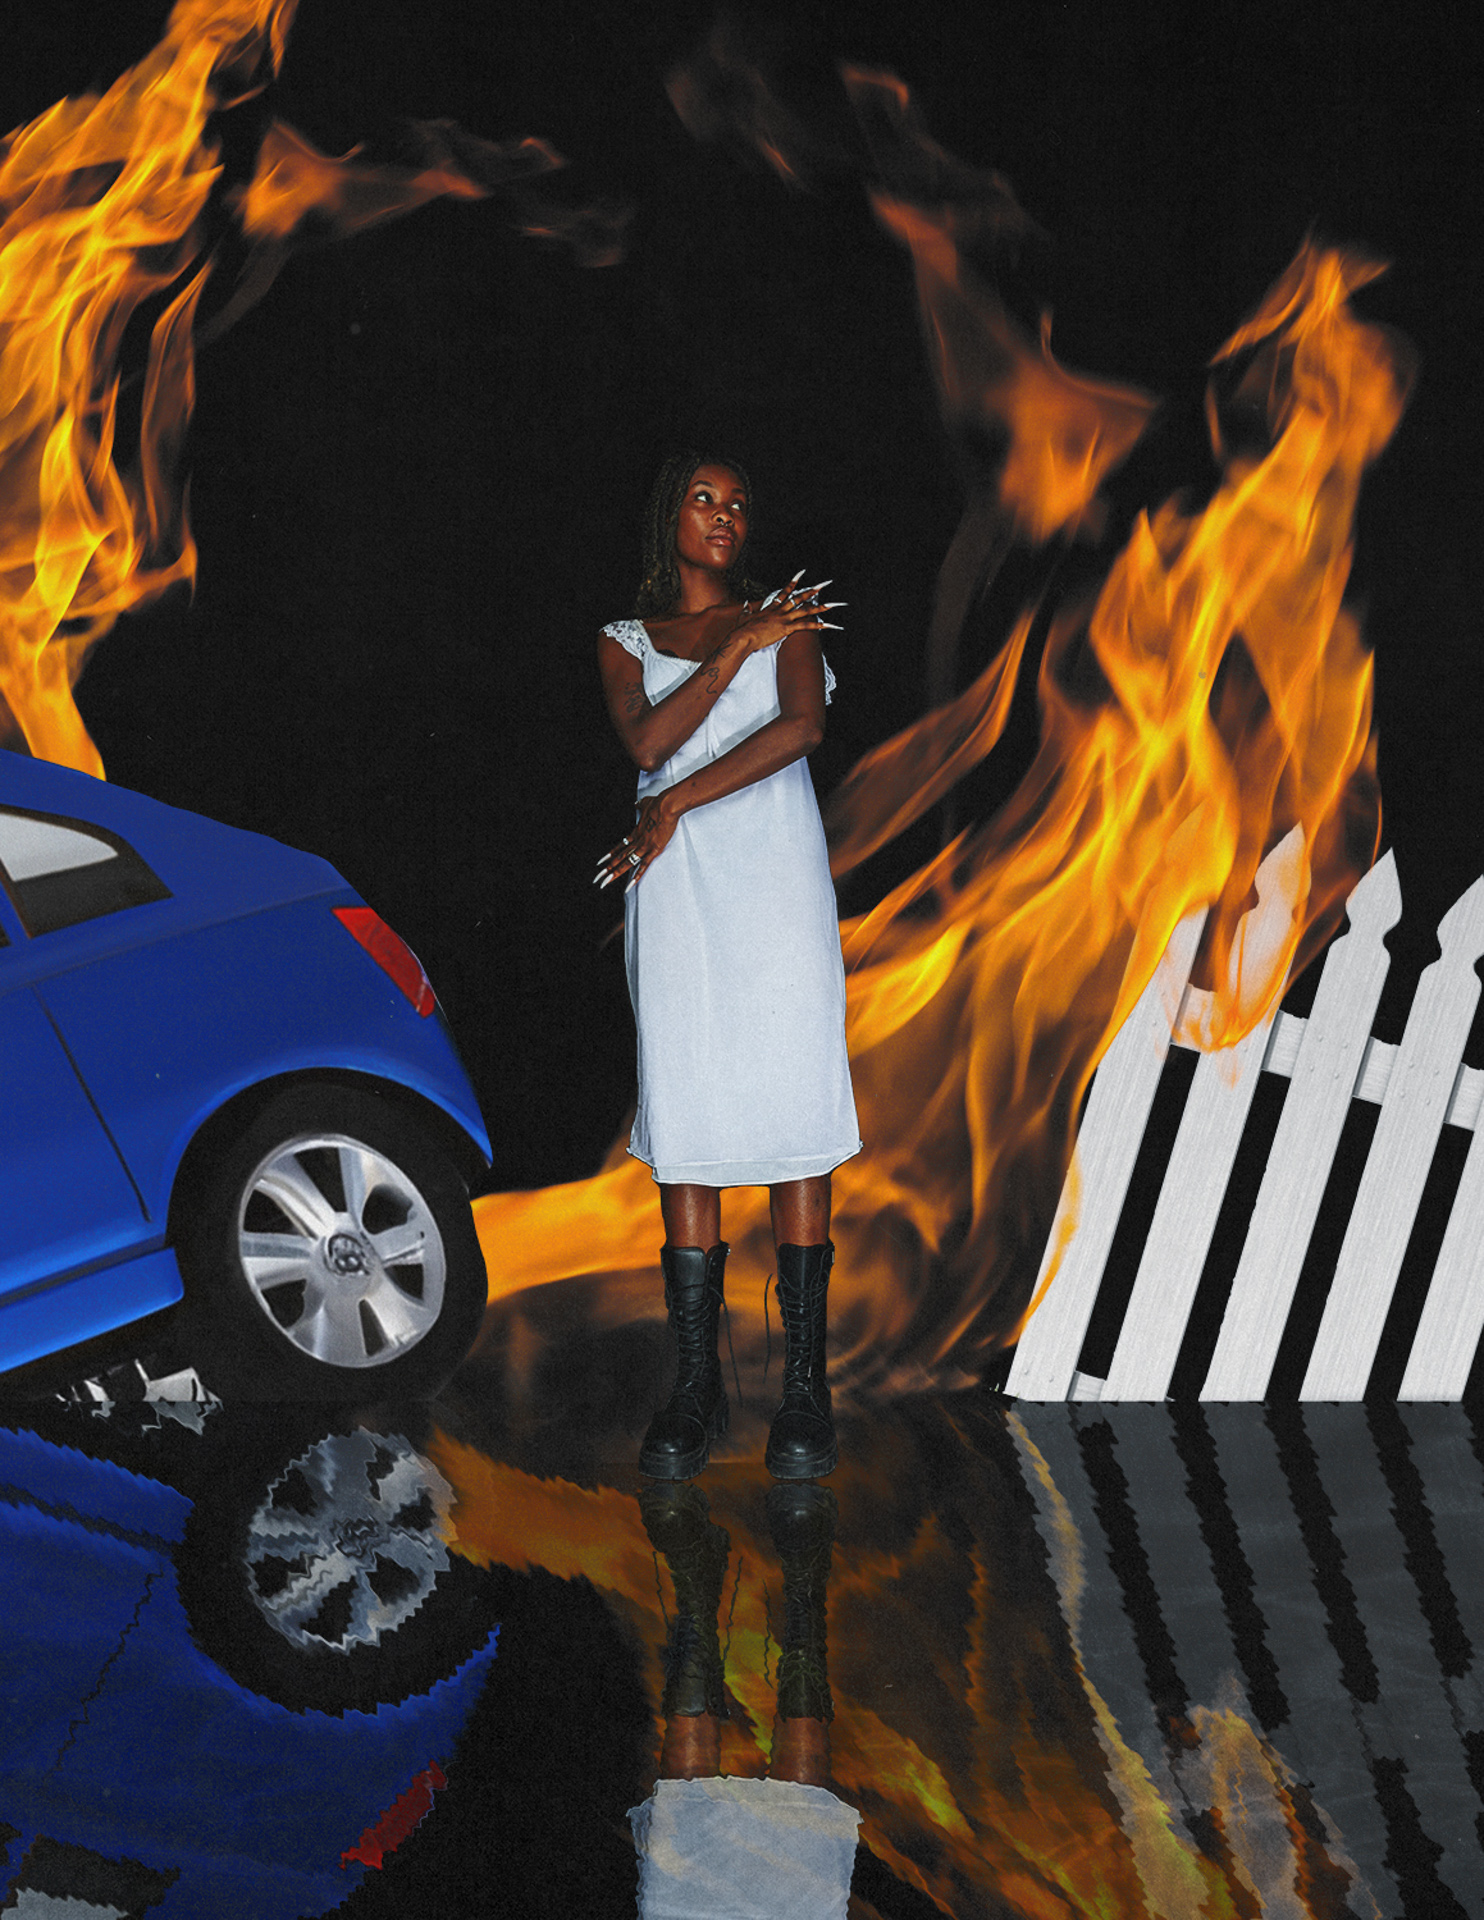 A person stands in the middle of the photograph while being surrounded by flames, to the left of them is the back end of a car and to the right of them a white picket fence. The bottom quarter of the image is reflected